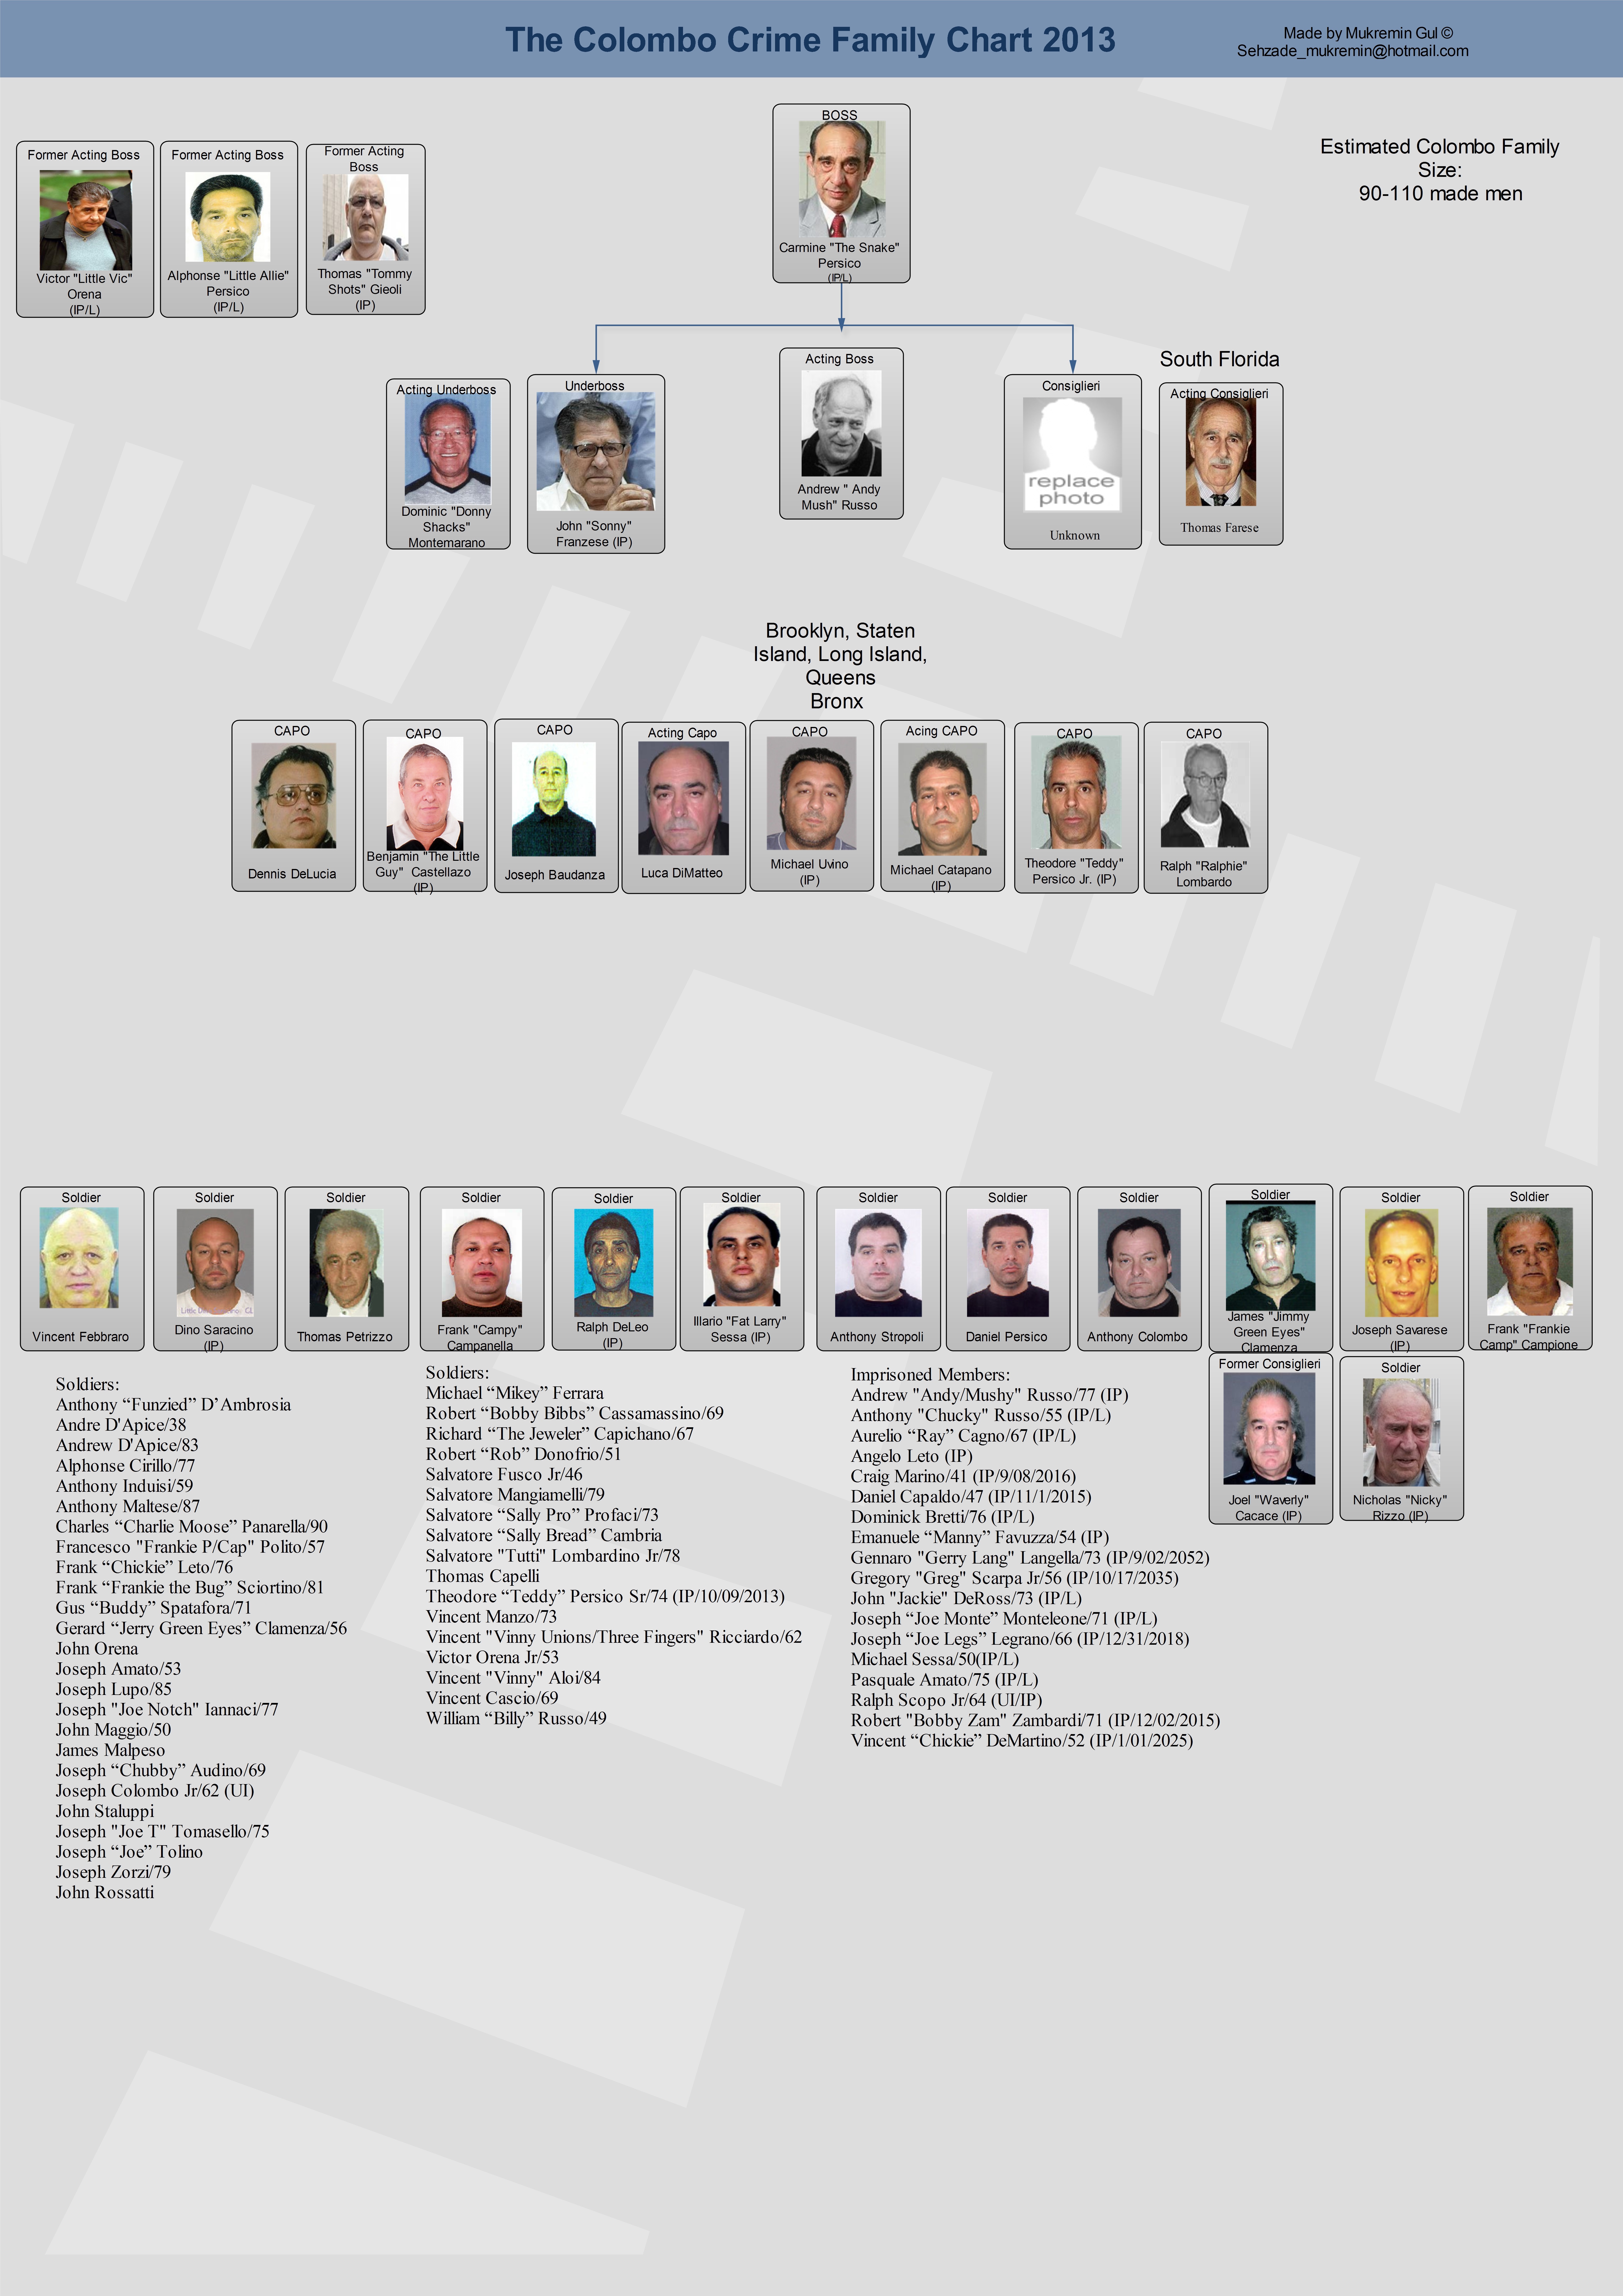 Mafia Families | Colombo Family - The Gangster Report